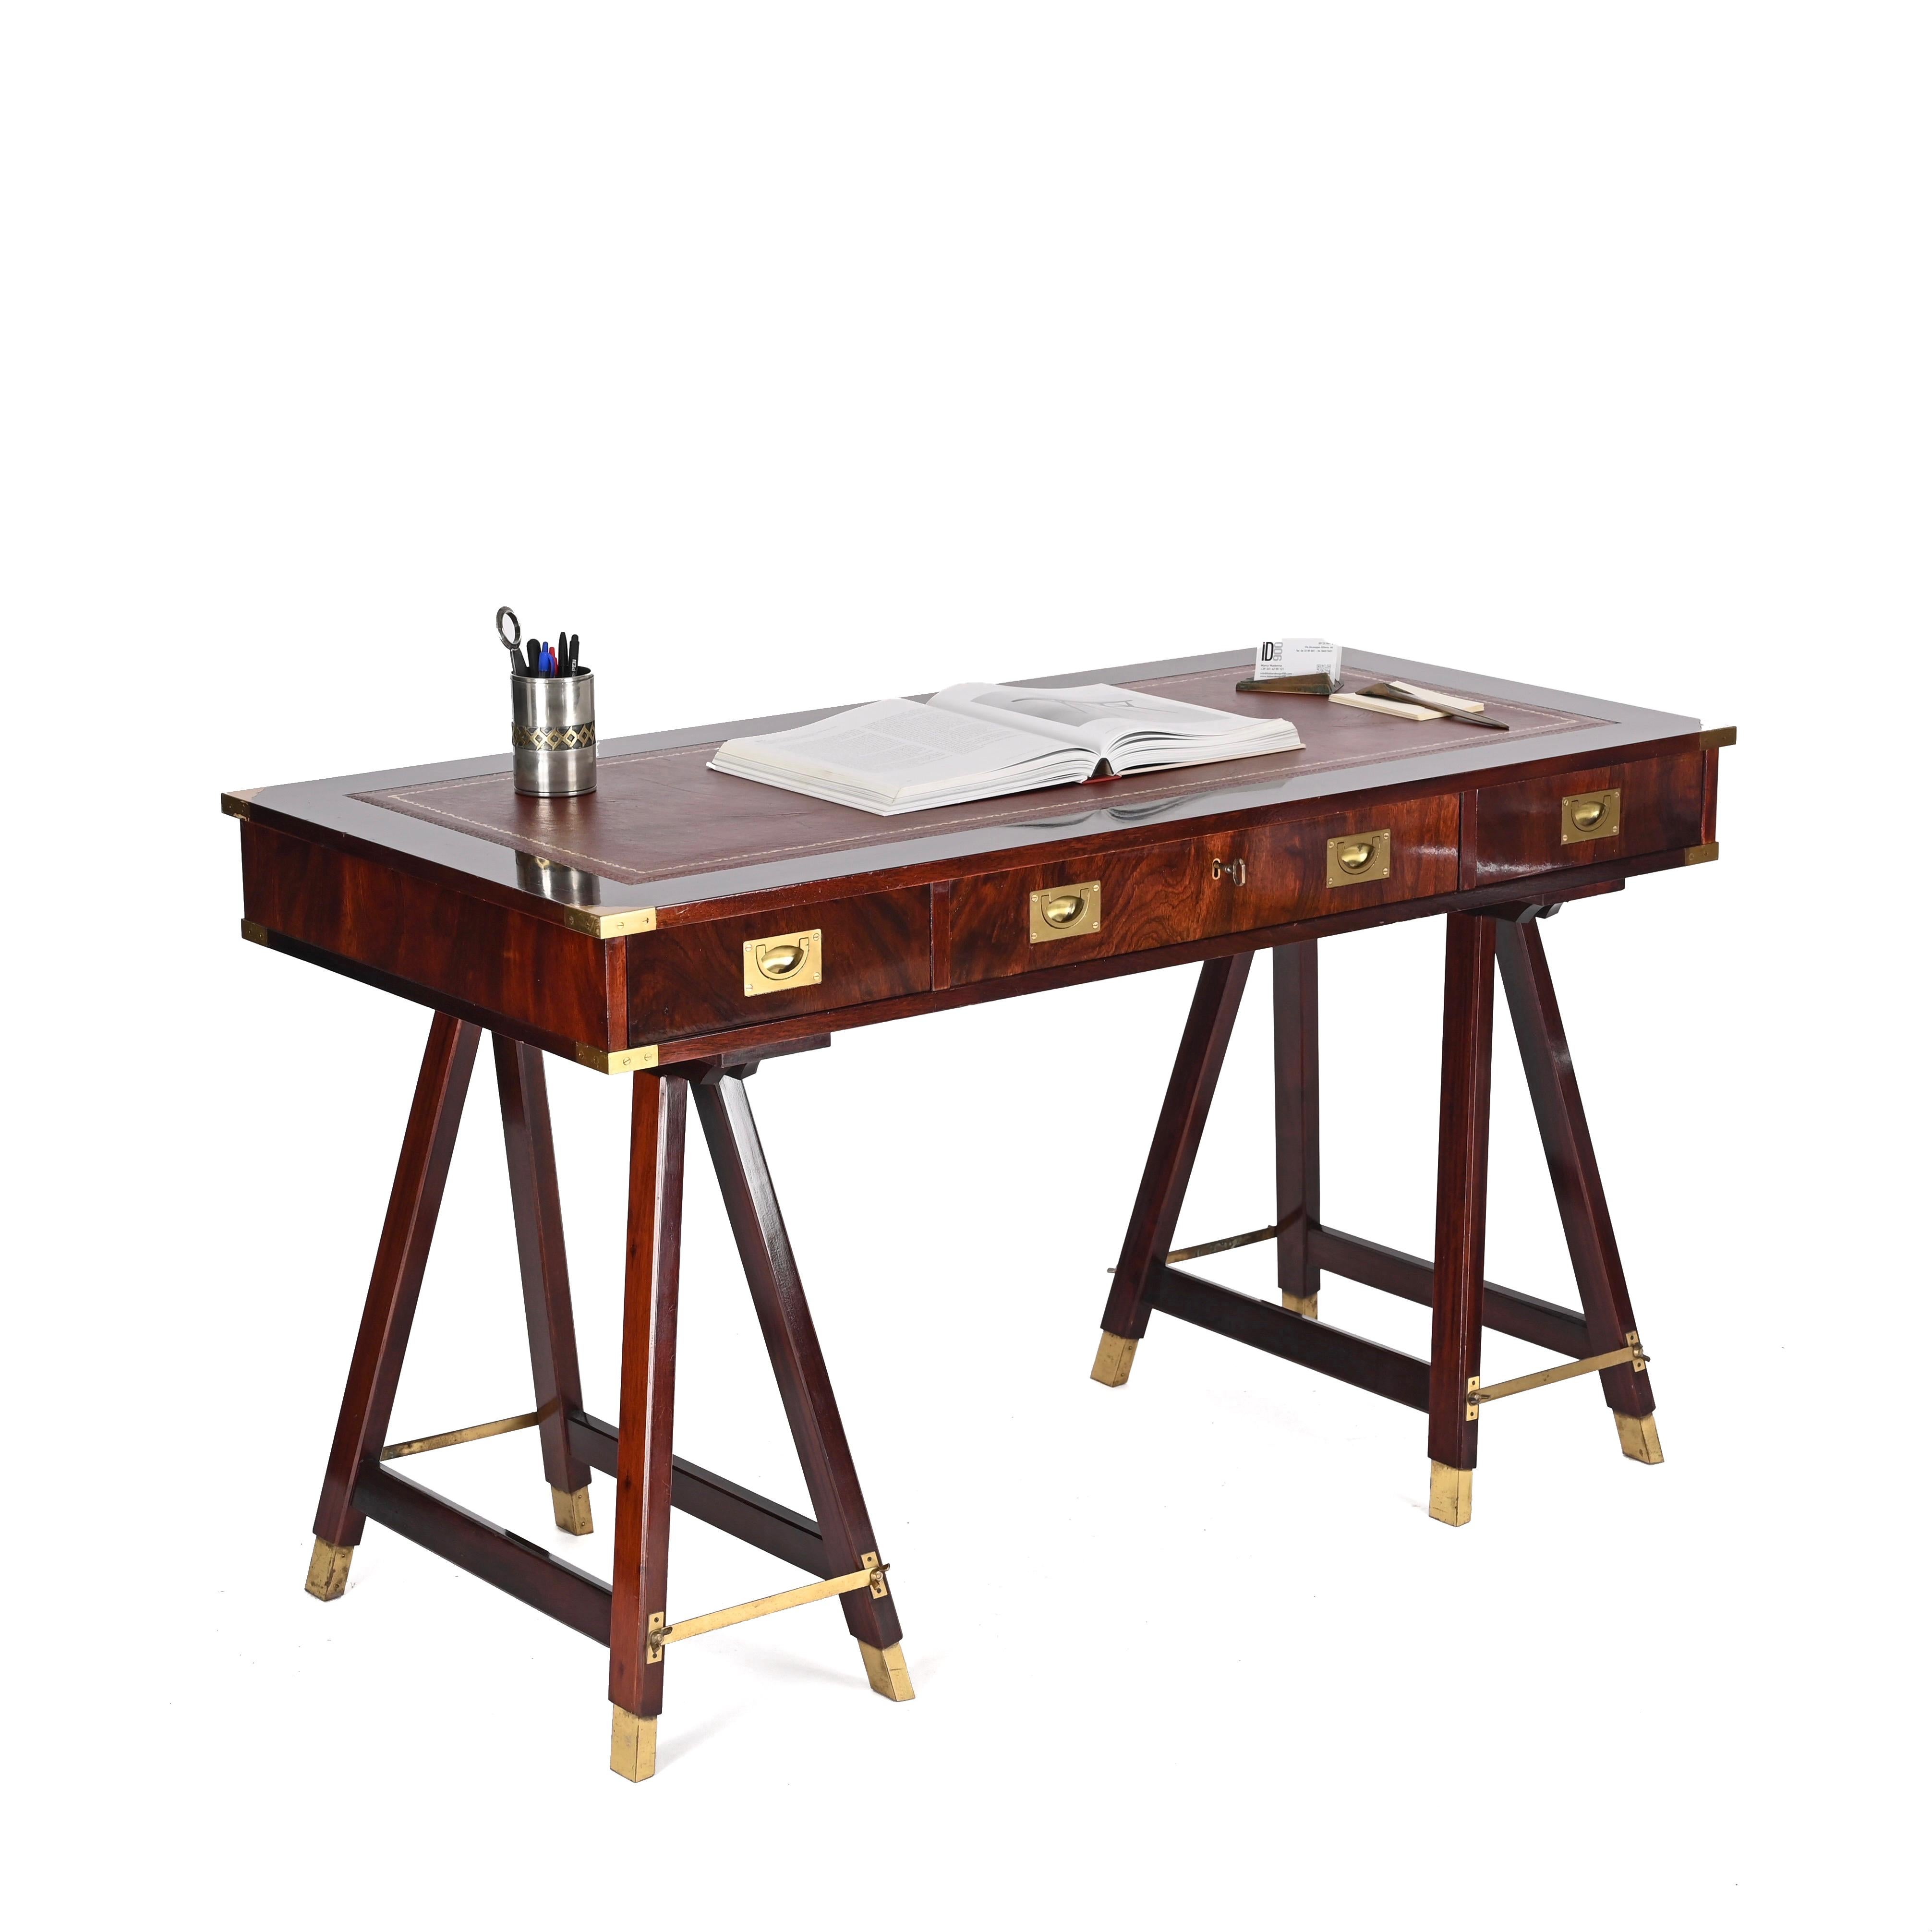 Stunning Mid-Century military campaign style desk. This fantastic piece was produced in Italy and is signed by Sea Line Orvieto in the 1960s.

This desk is made in a marvelous wood with outstanding wood grains, the top is decorated with its original